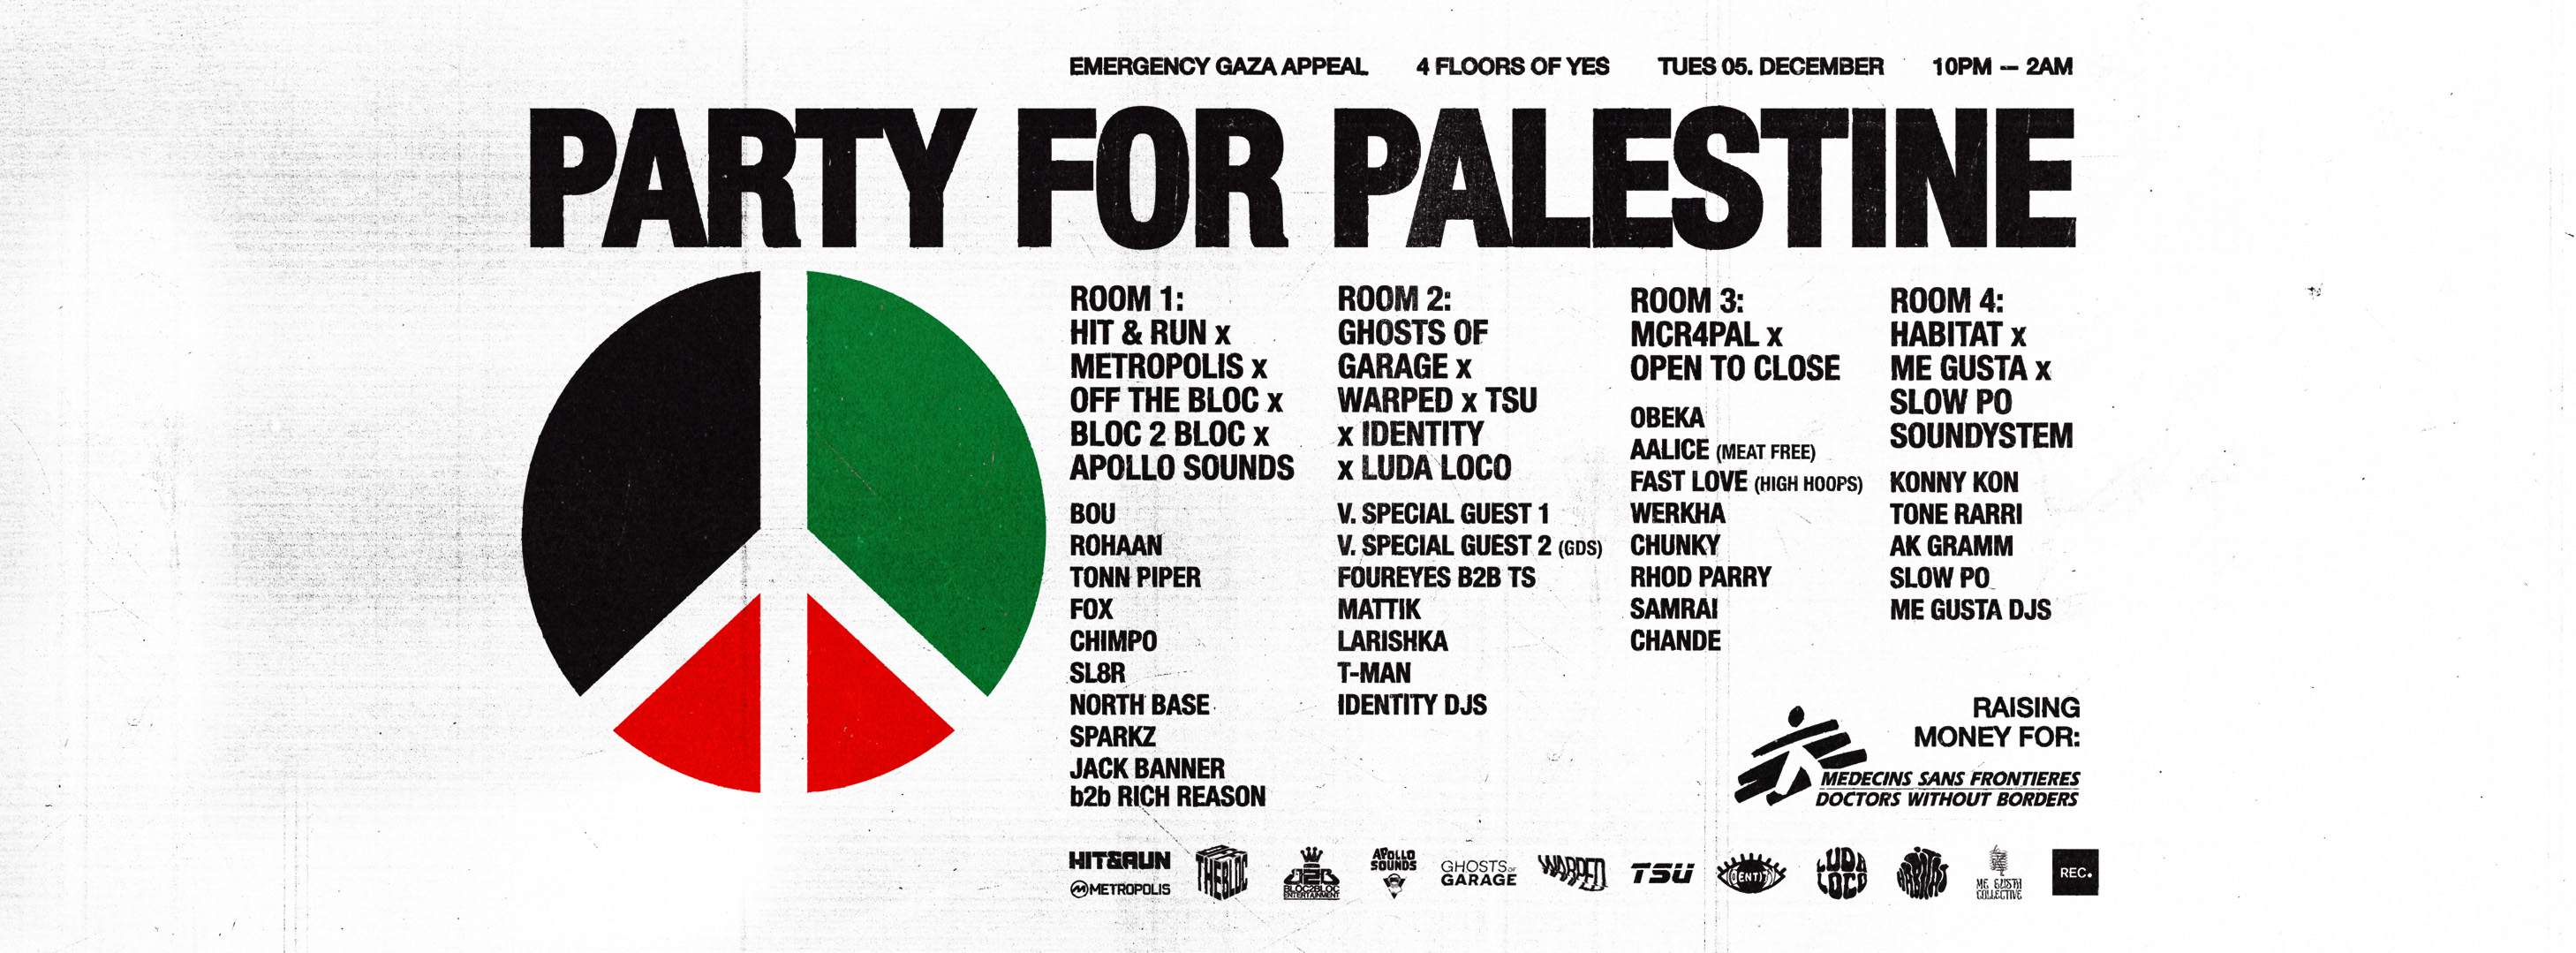 PARTY FOR PALESTINE - Raising Money for MSF - All 4 floors of Yes - Página frontal